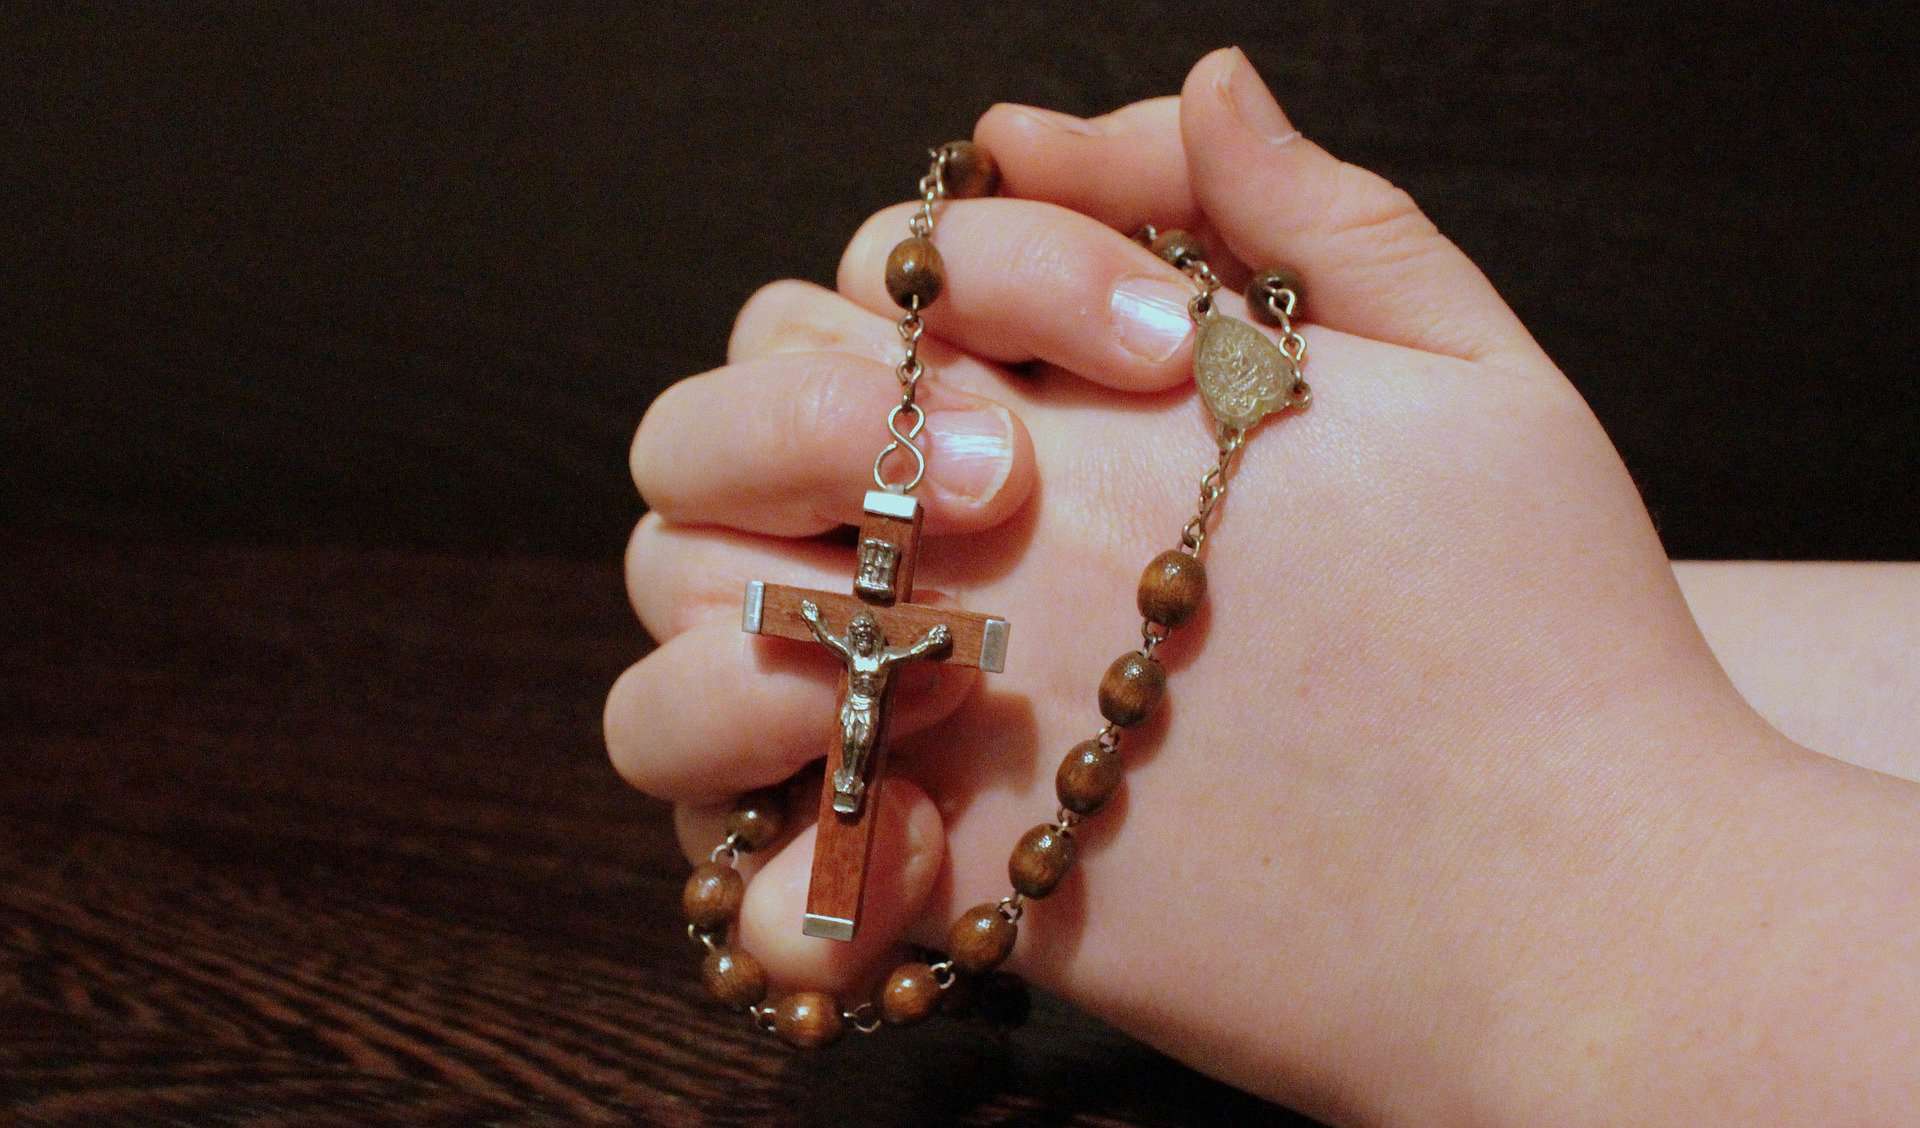 A child's clasped hands are seen from the side with a rosary and cross draped over them.